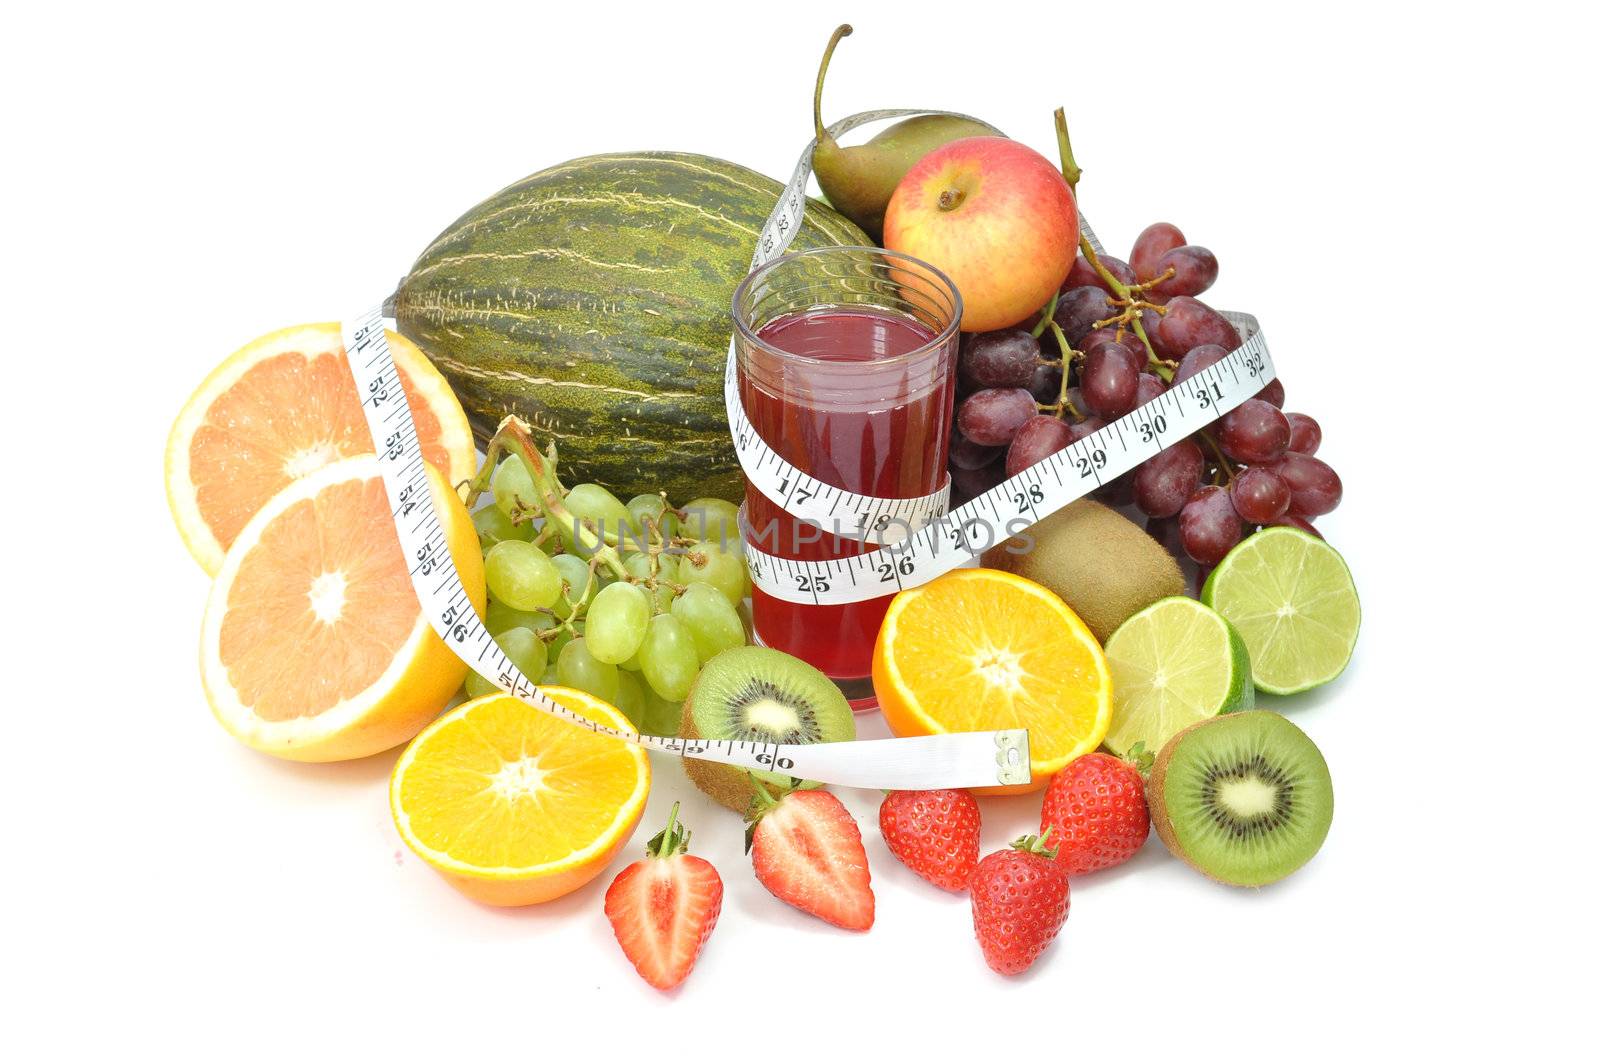 Fresh glass of juice surrounded by an assortment of fruit and a tape measure